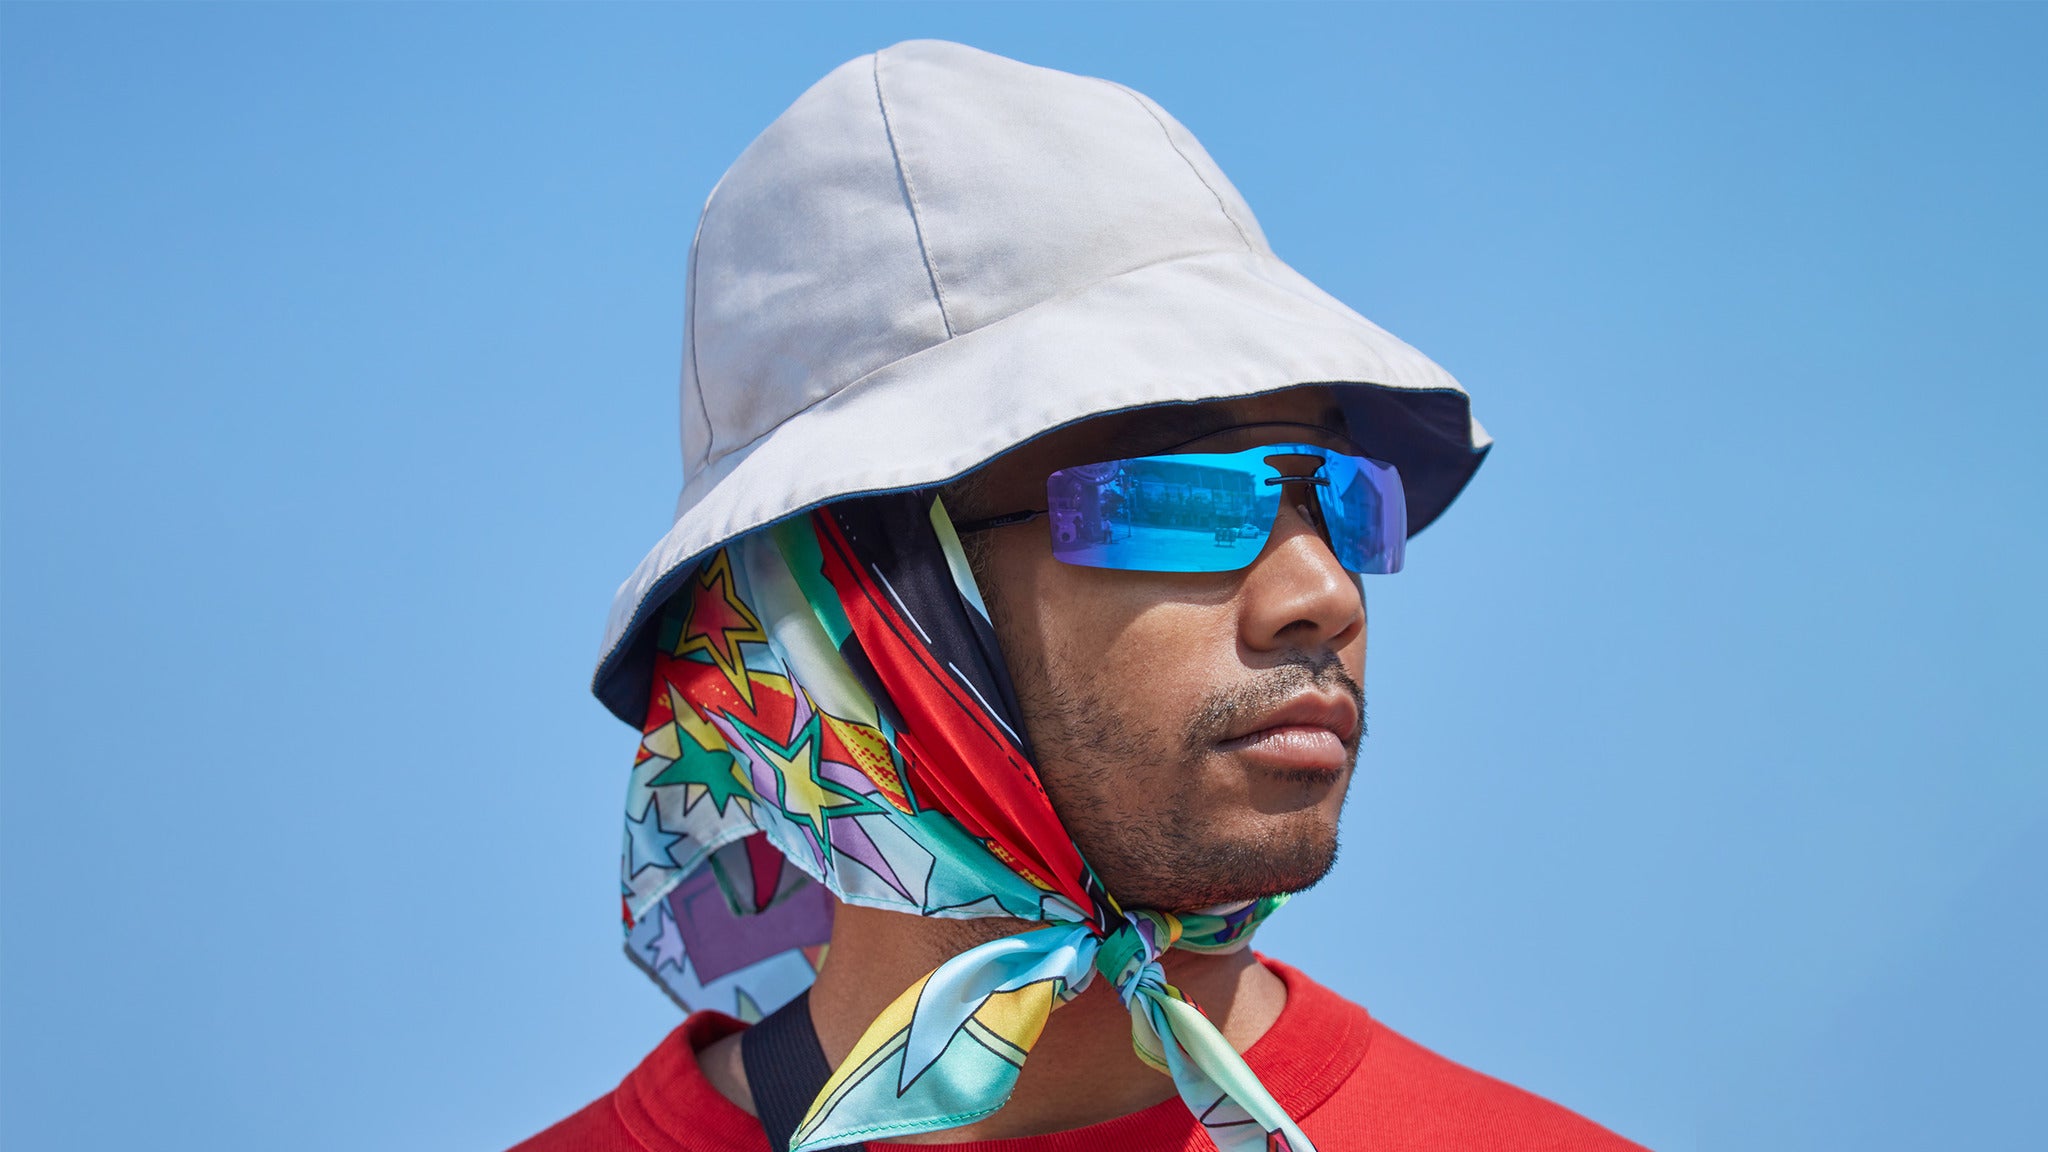 Toro y Moi in Hollywood promo photo for Live Nation Mobile App presale offer code